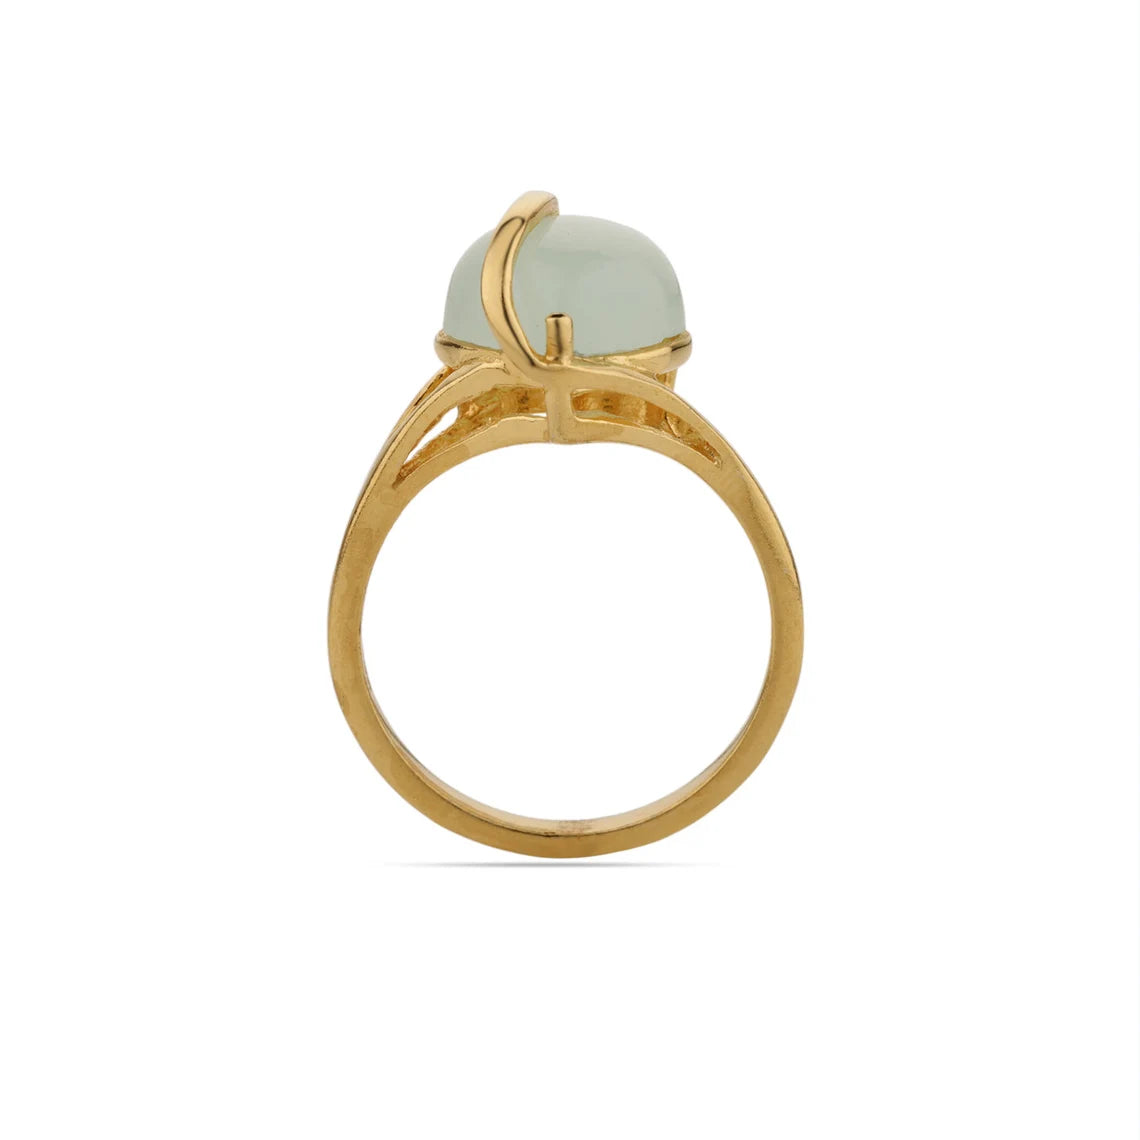 Aqua Chalcedony Ring, 925 Sterling Silver Ring, Gold Plated Ring, Handmade Ring, Heart Ring, wedding ring, Dainty Ring, Chalcedony Ring